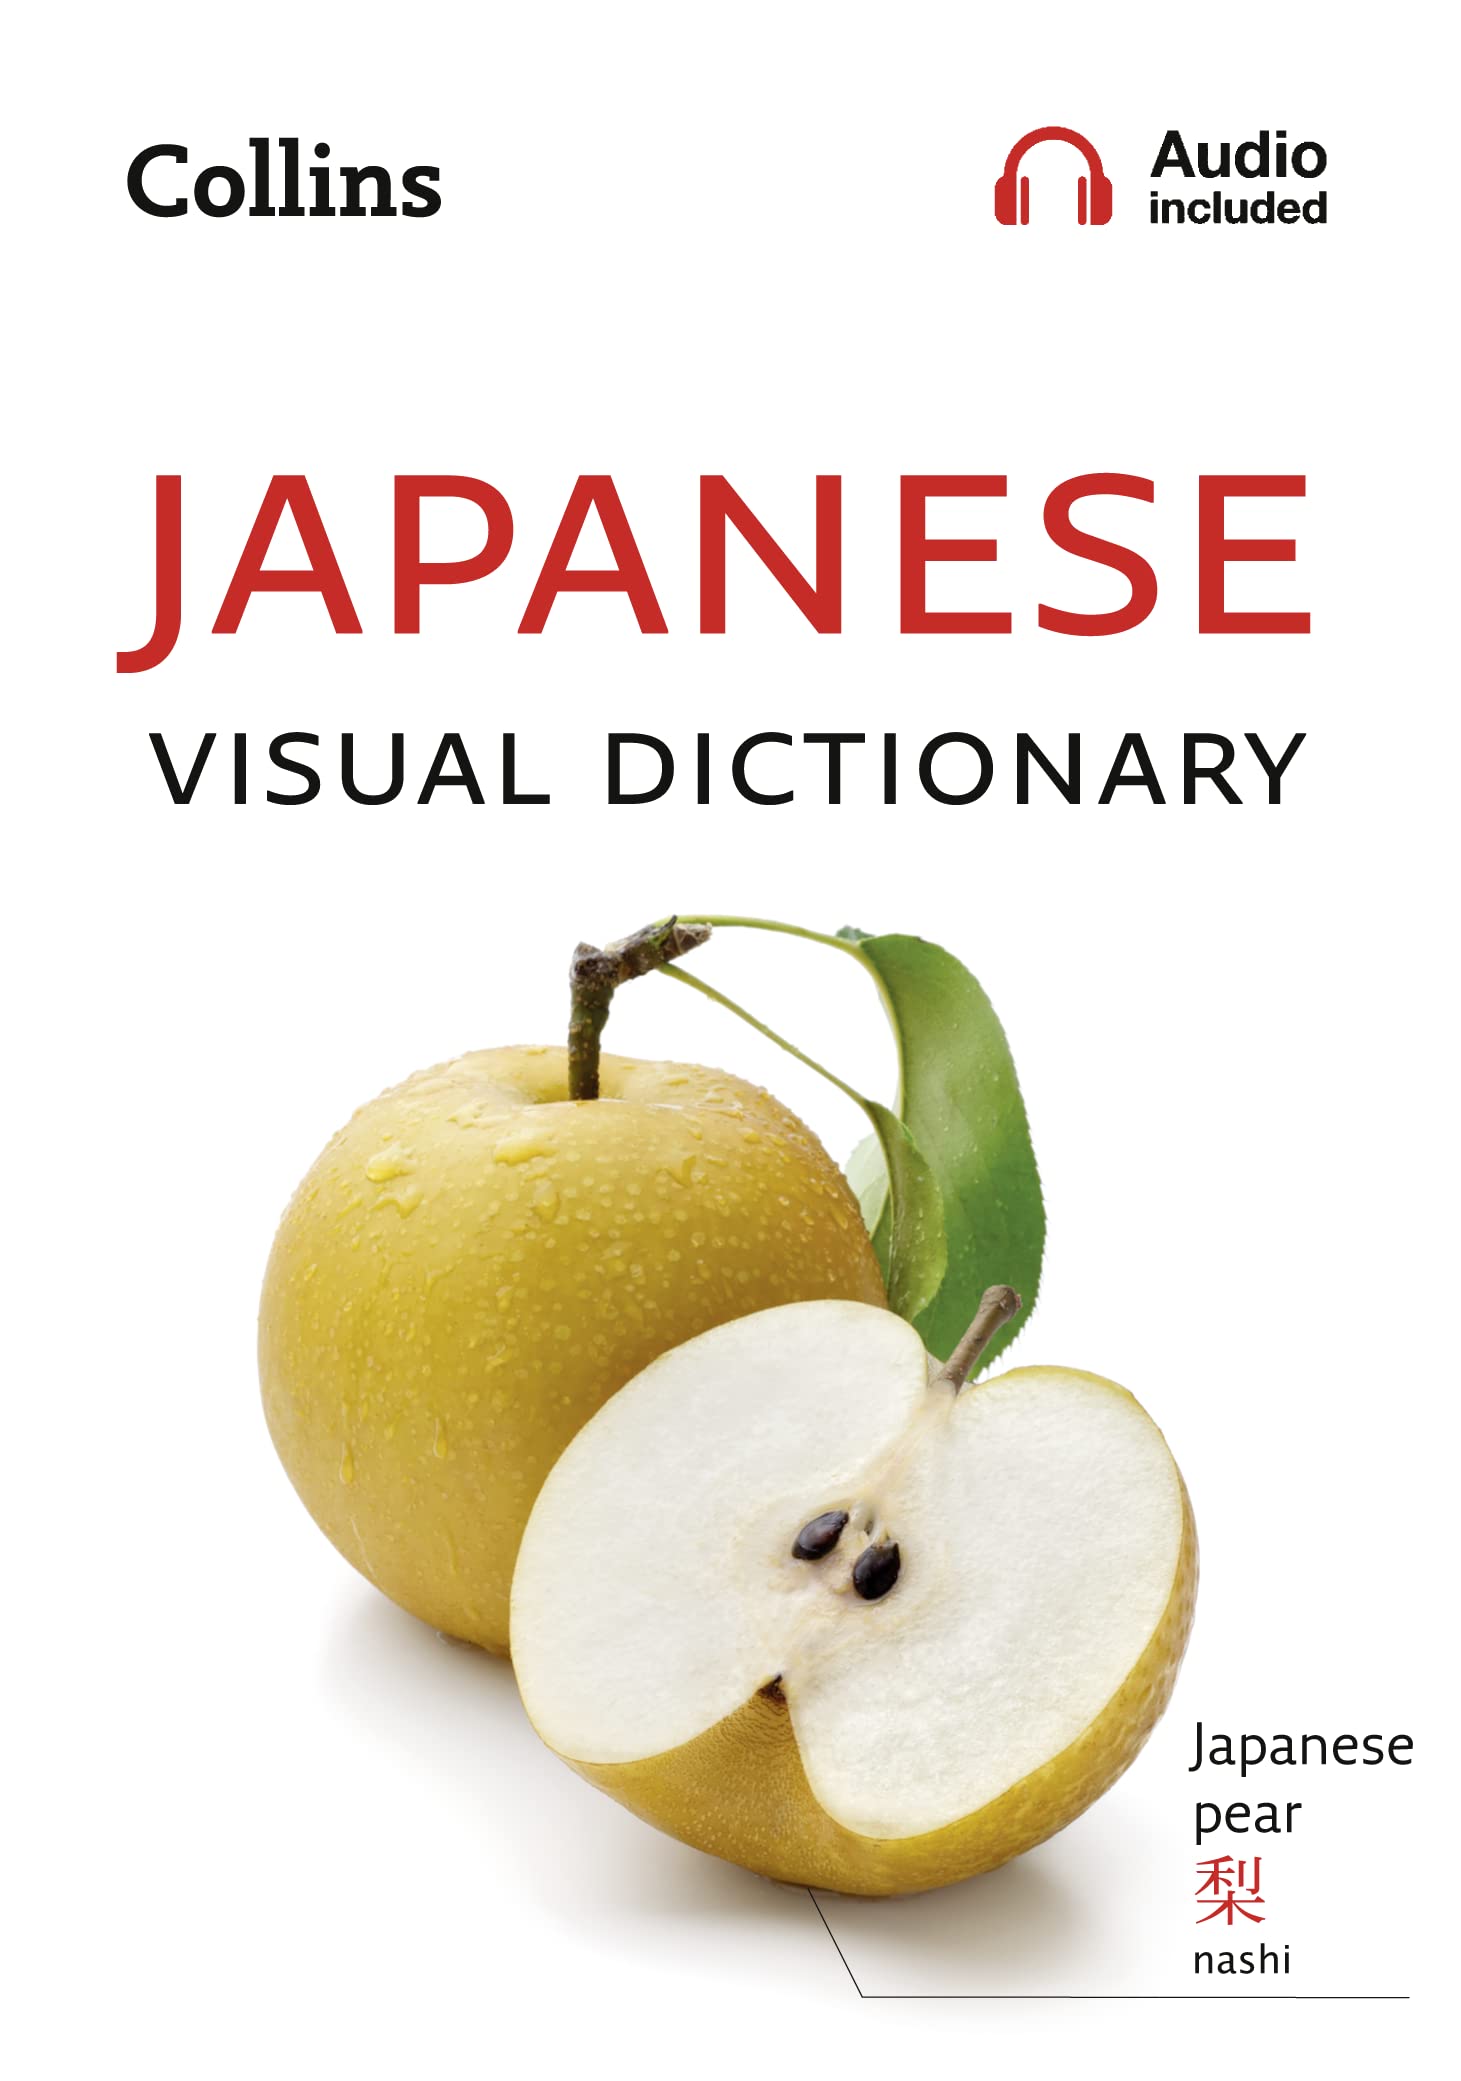 Collins Visual Dictionary: Japanese